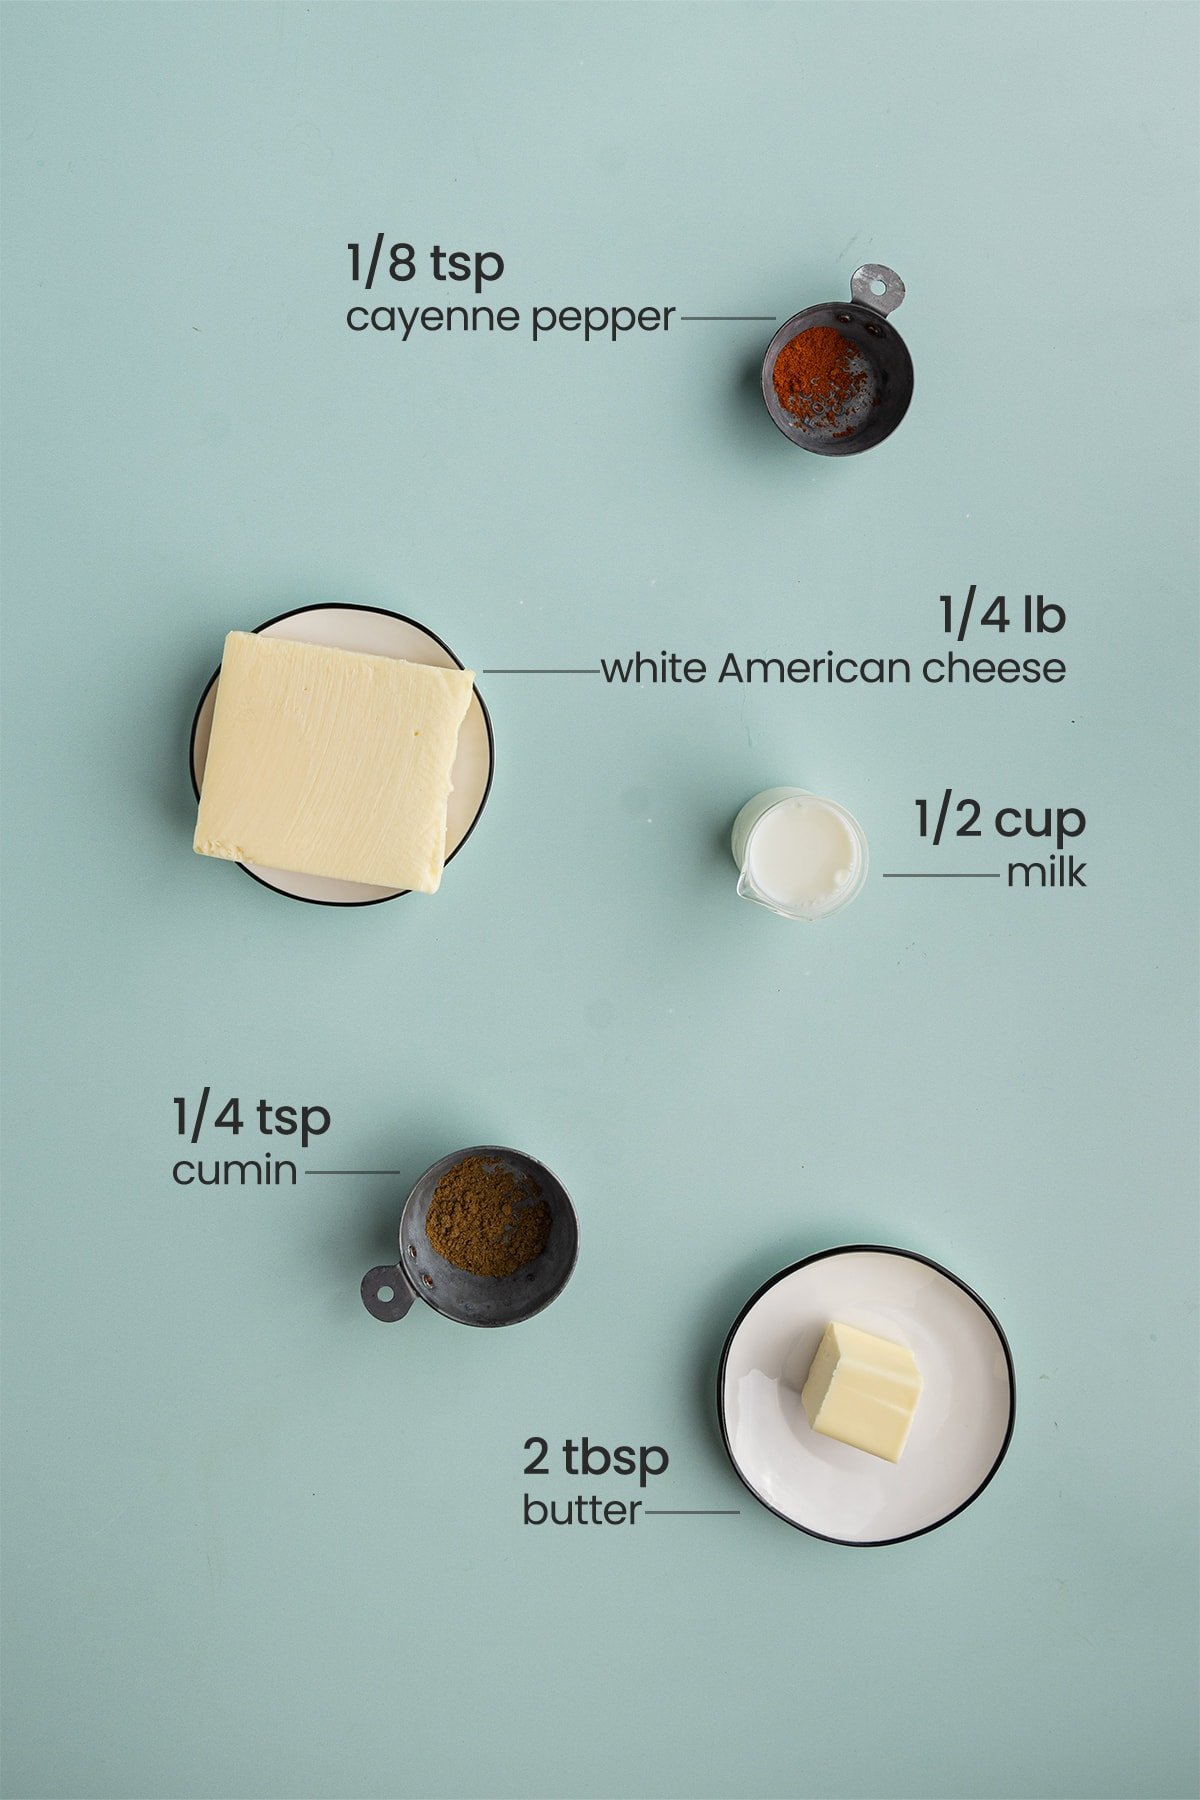 All 5 ingredients for Tex-Mex Queso Blanco including cayenne pepper, white American cheese, milk, cumin, and unsalted butter